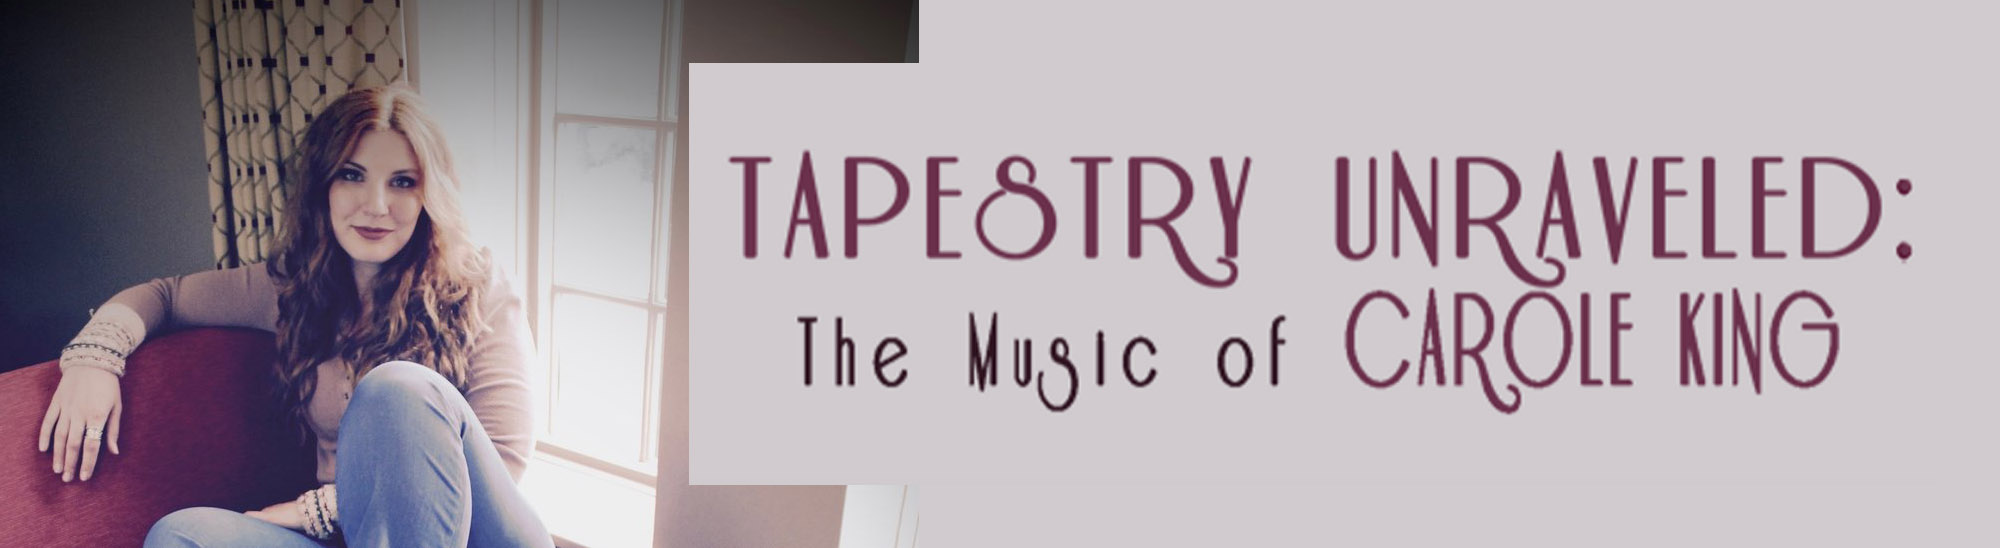 tapestry-unraveled-the-music-of-carol-king